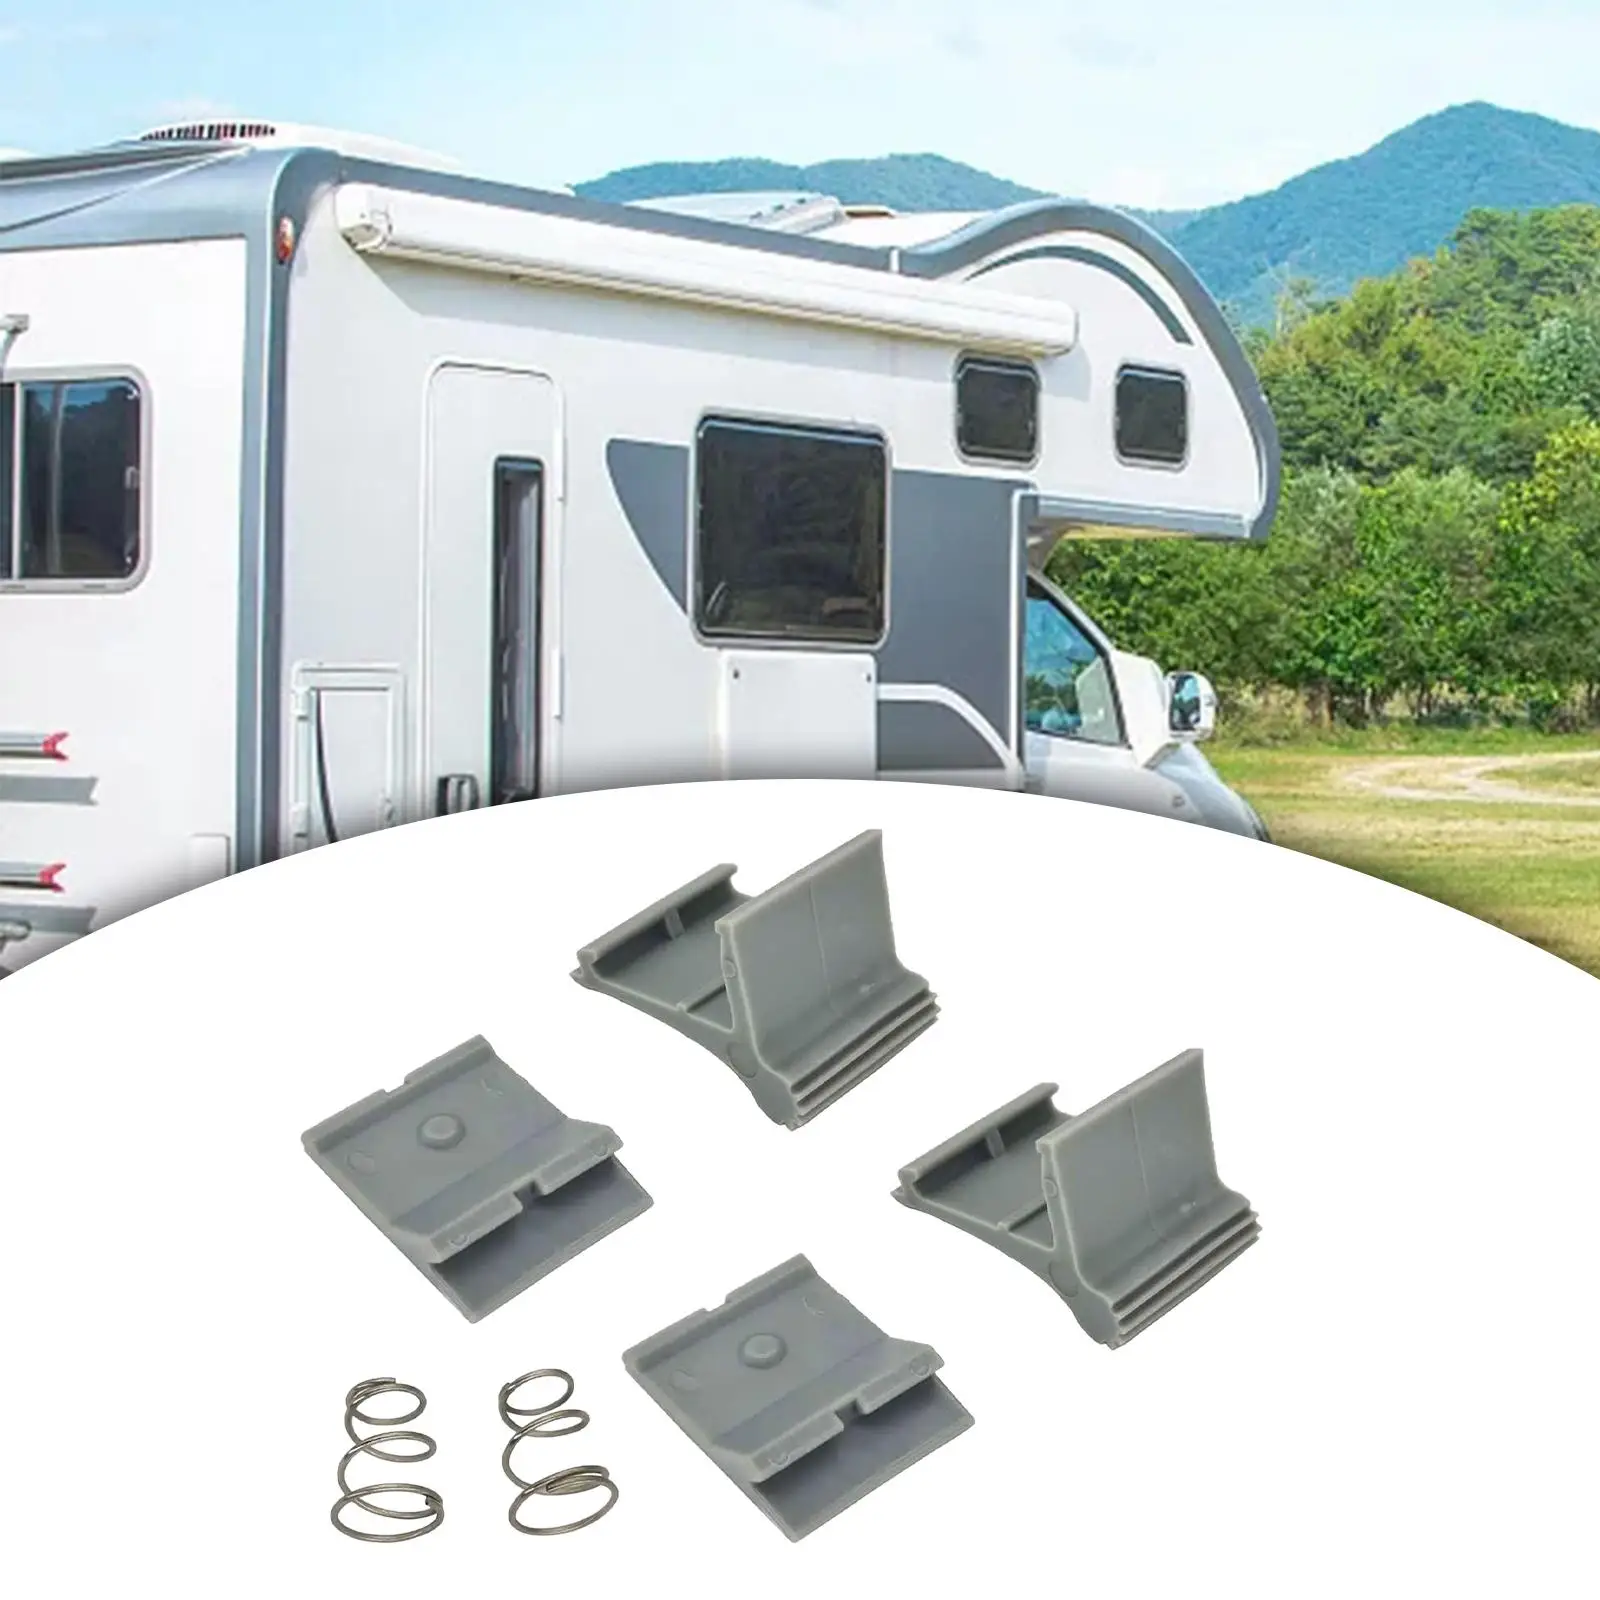 Awning Arm Slider Catch Set Repair Parts Spare Parts 4 Slider Catch Easy to Install Replaces for RV Motorhome